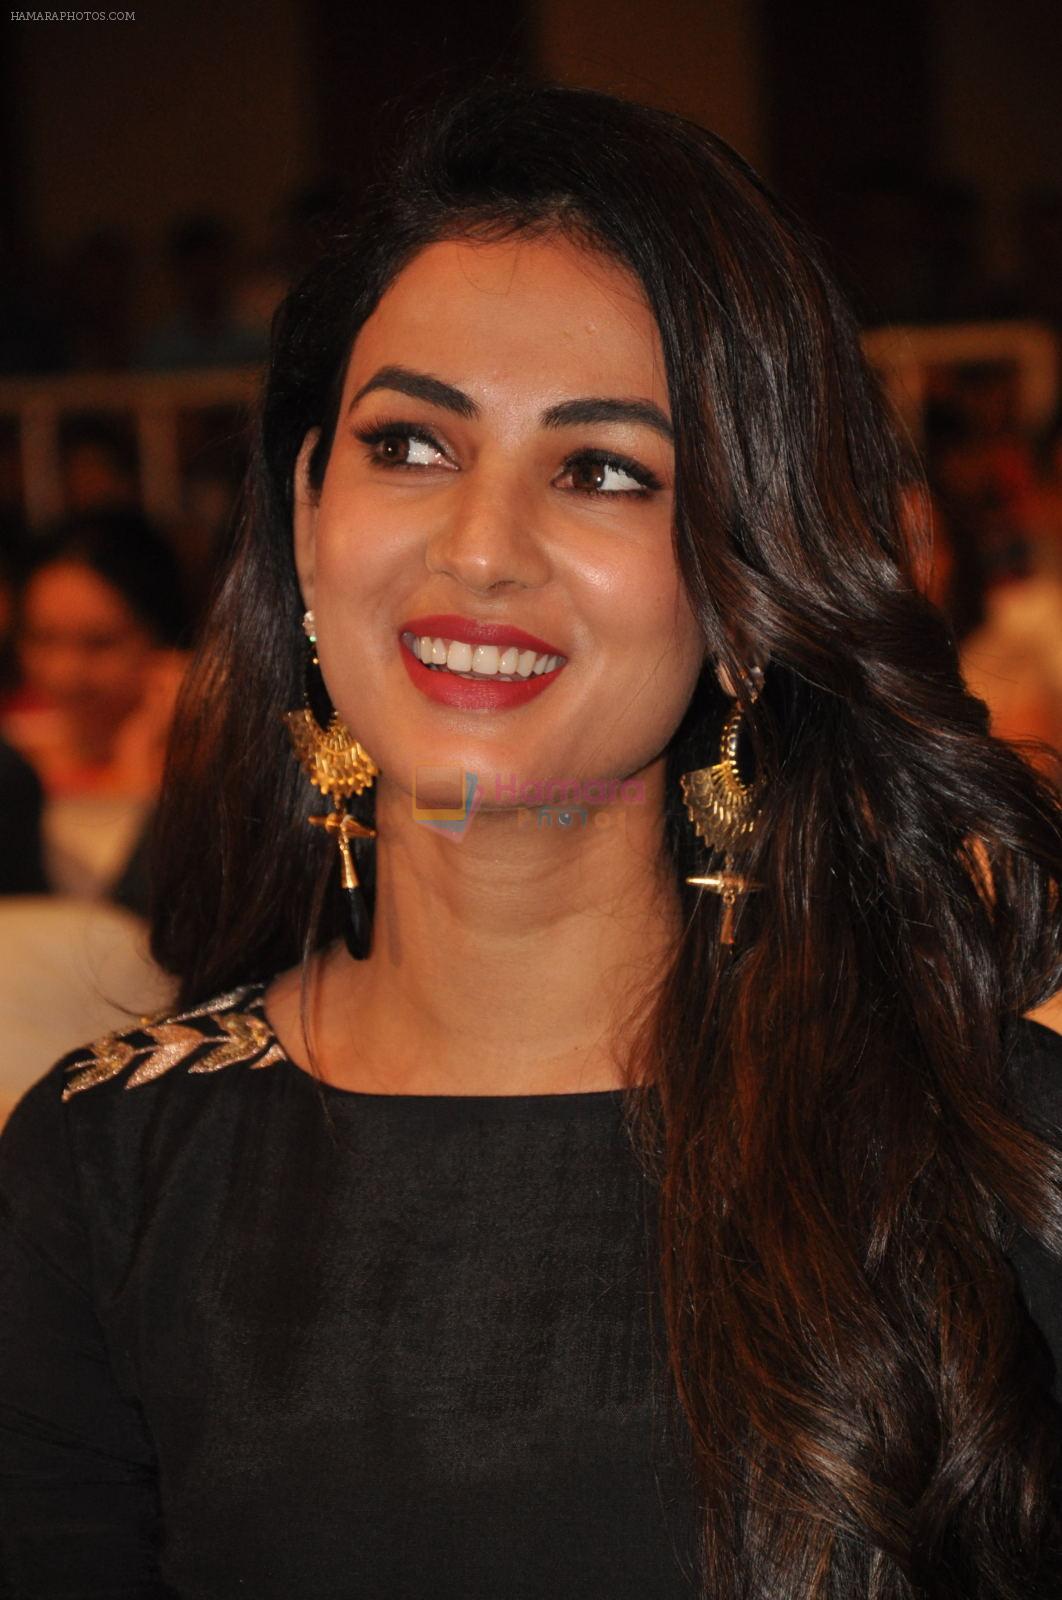 Sonal Chauhan at Size Zero music launch on 1st Nov 2015